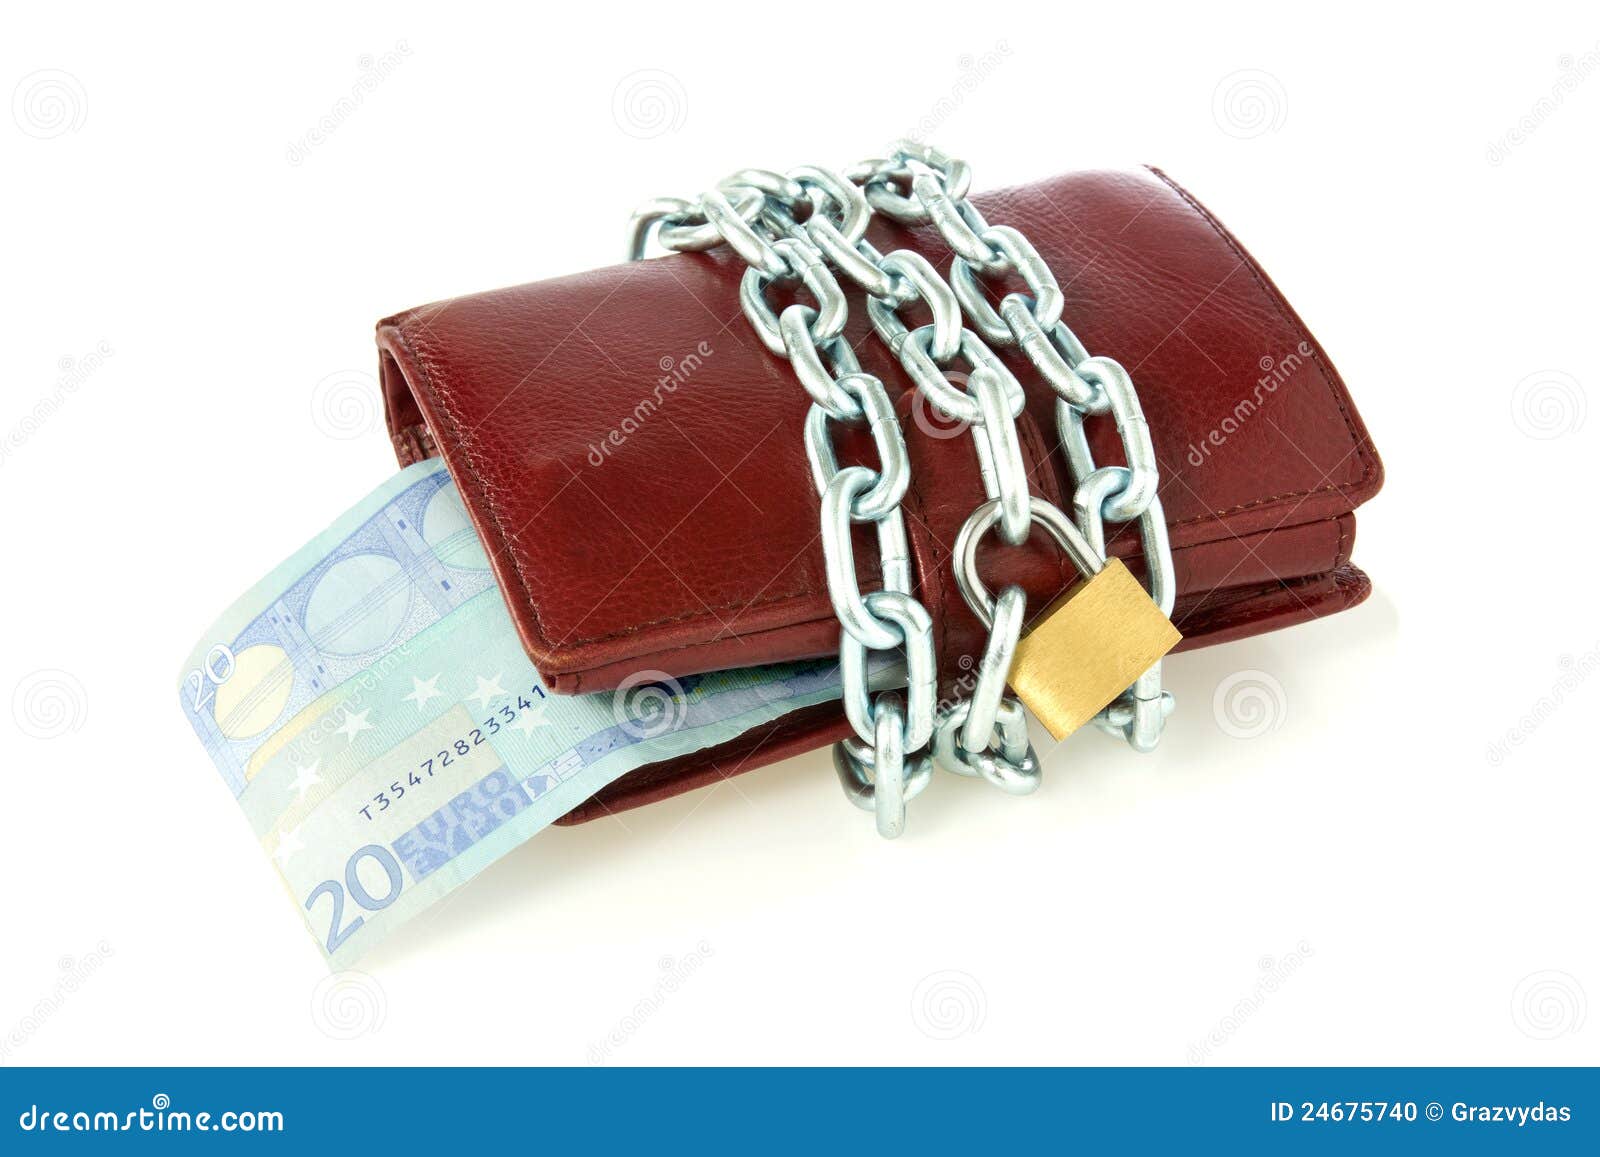 Locked Wallet With Euro Currency Stock Photo - Image of lock, business: 24675740